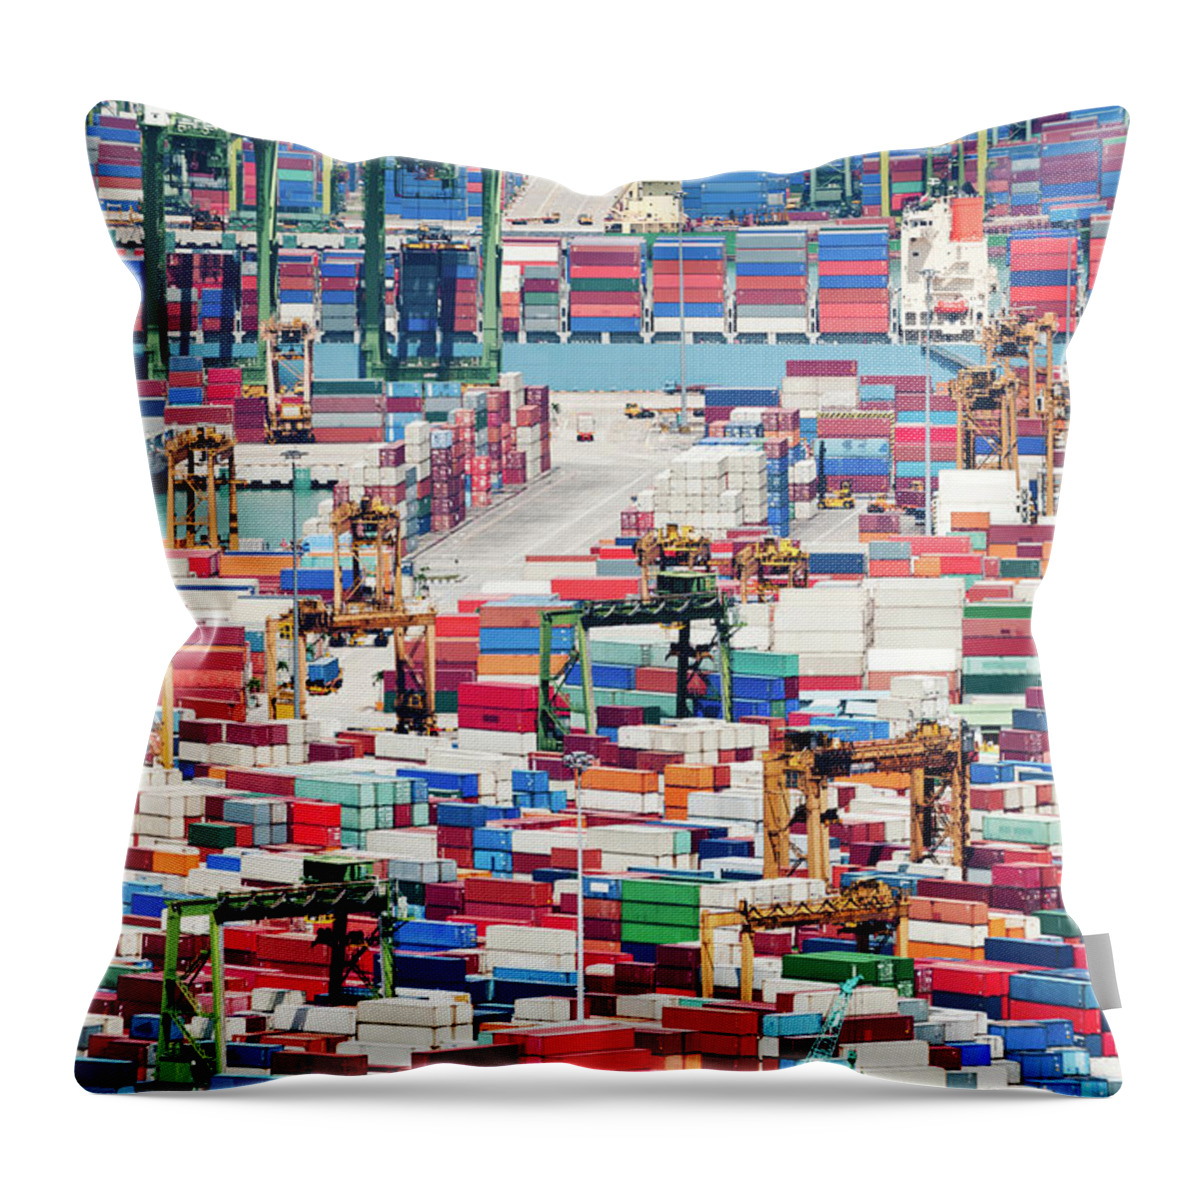 Trading Throw Pillow featuring the photograph Container Port by Tomml